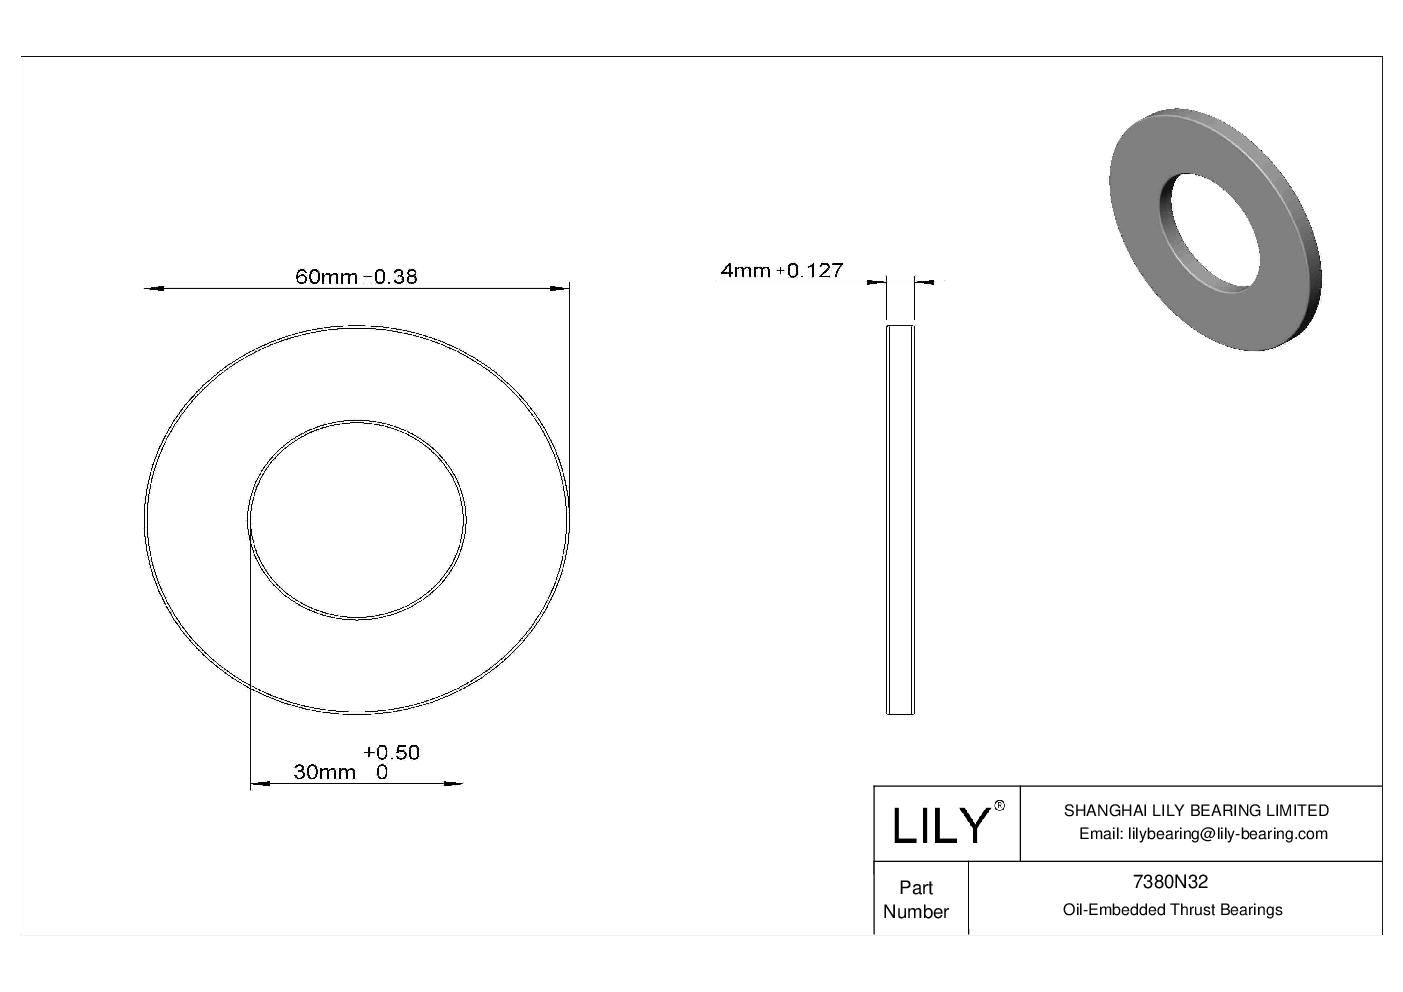 HDIANDC High-Load Ultra-Low-Friction Oil-Embedded Thrust Bearings cad drawing